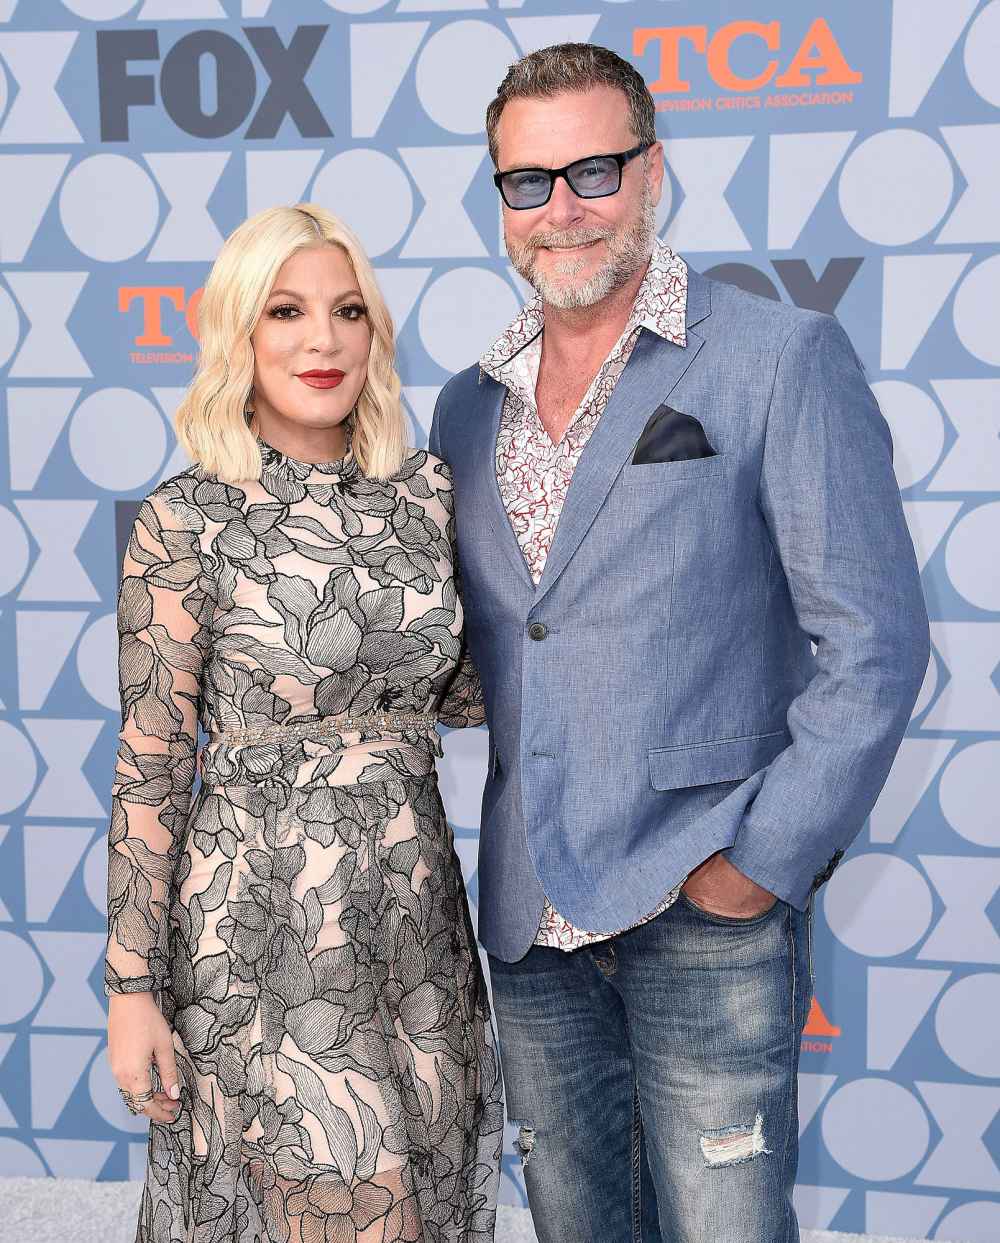 Tori Spelling Feels ‘Trapped’ in Marriage to Dean McDermott, But Won’t Get Divorced Due to Child Support Payments